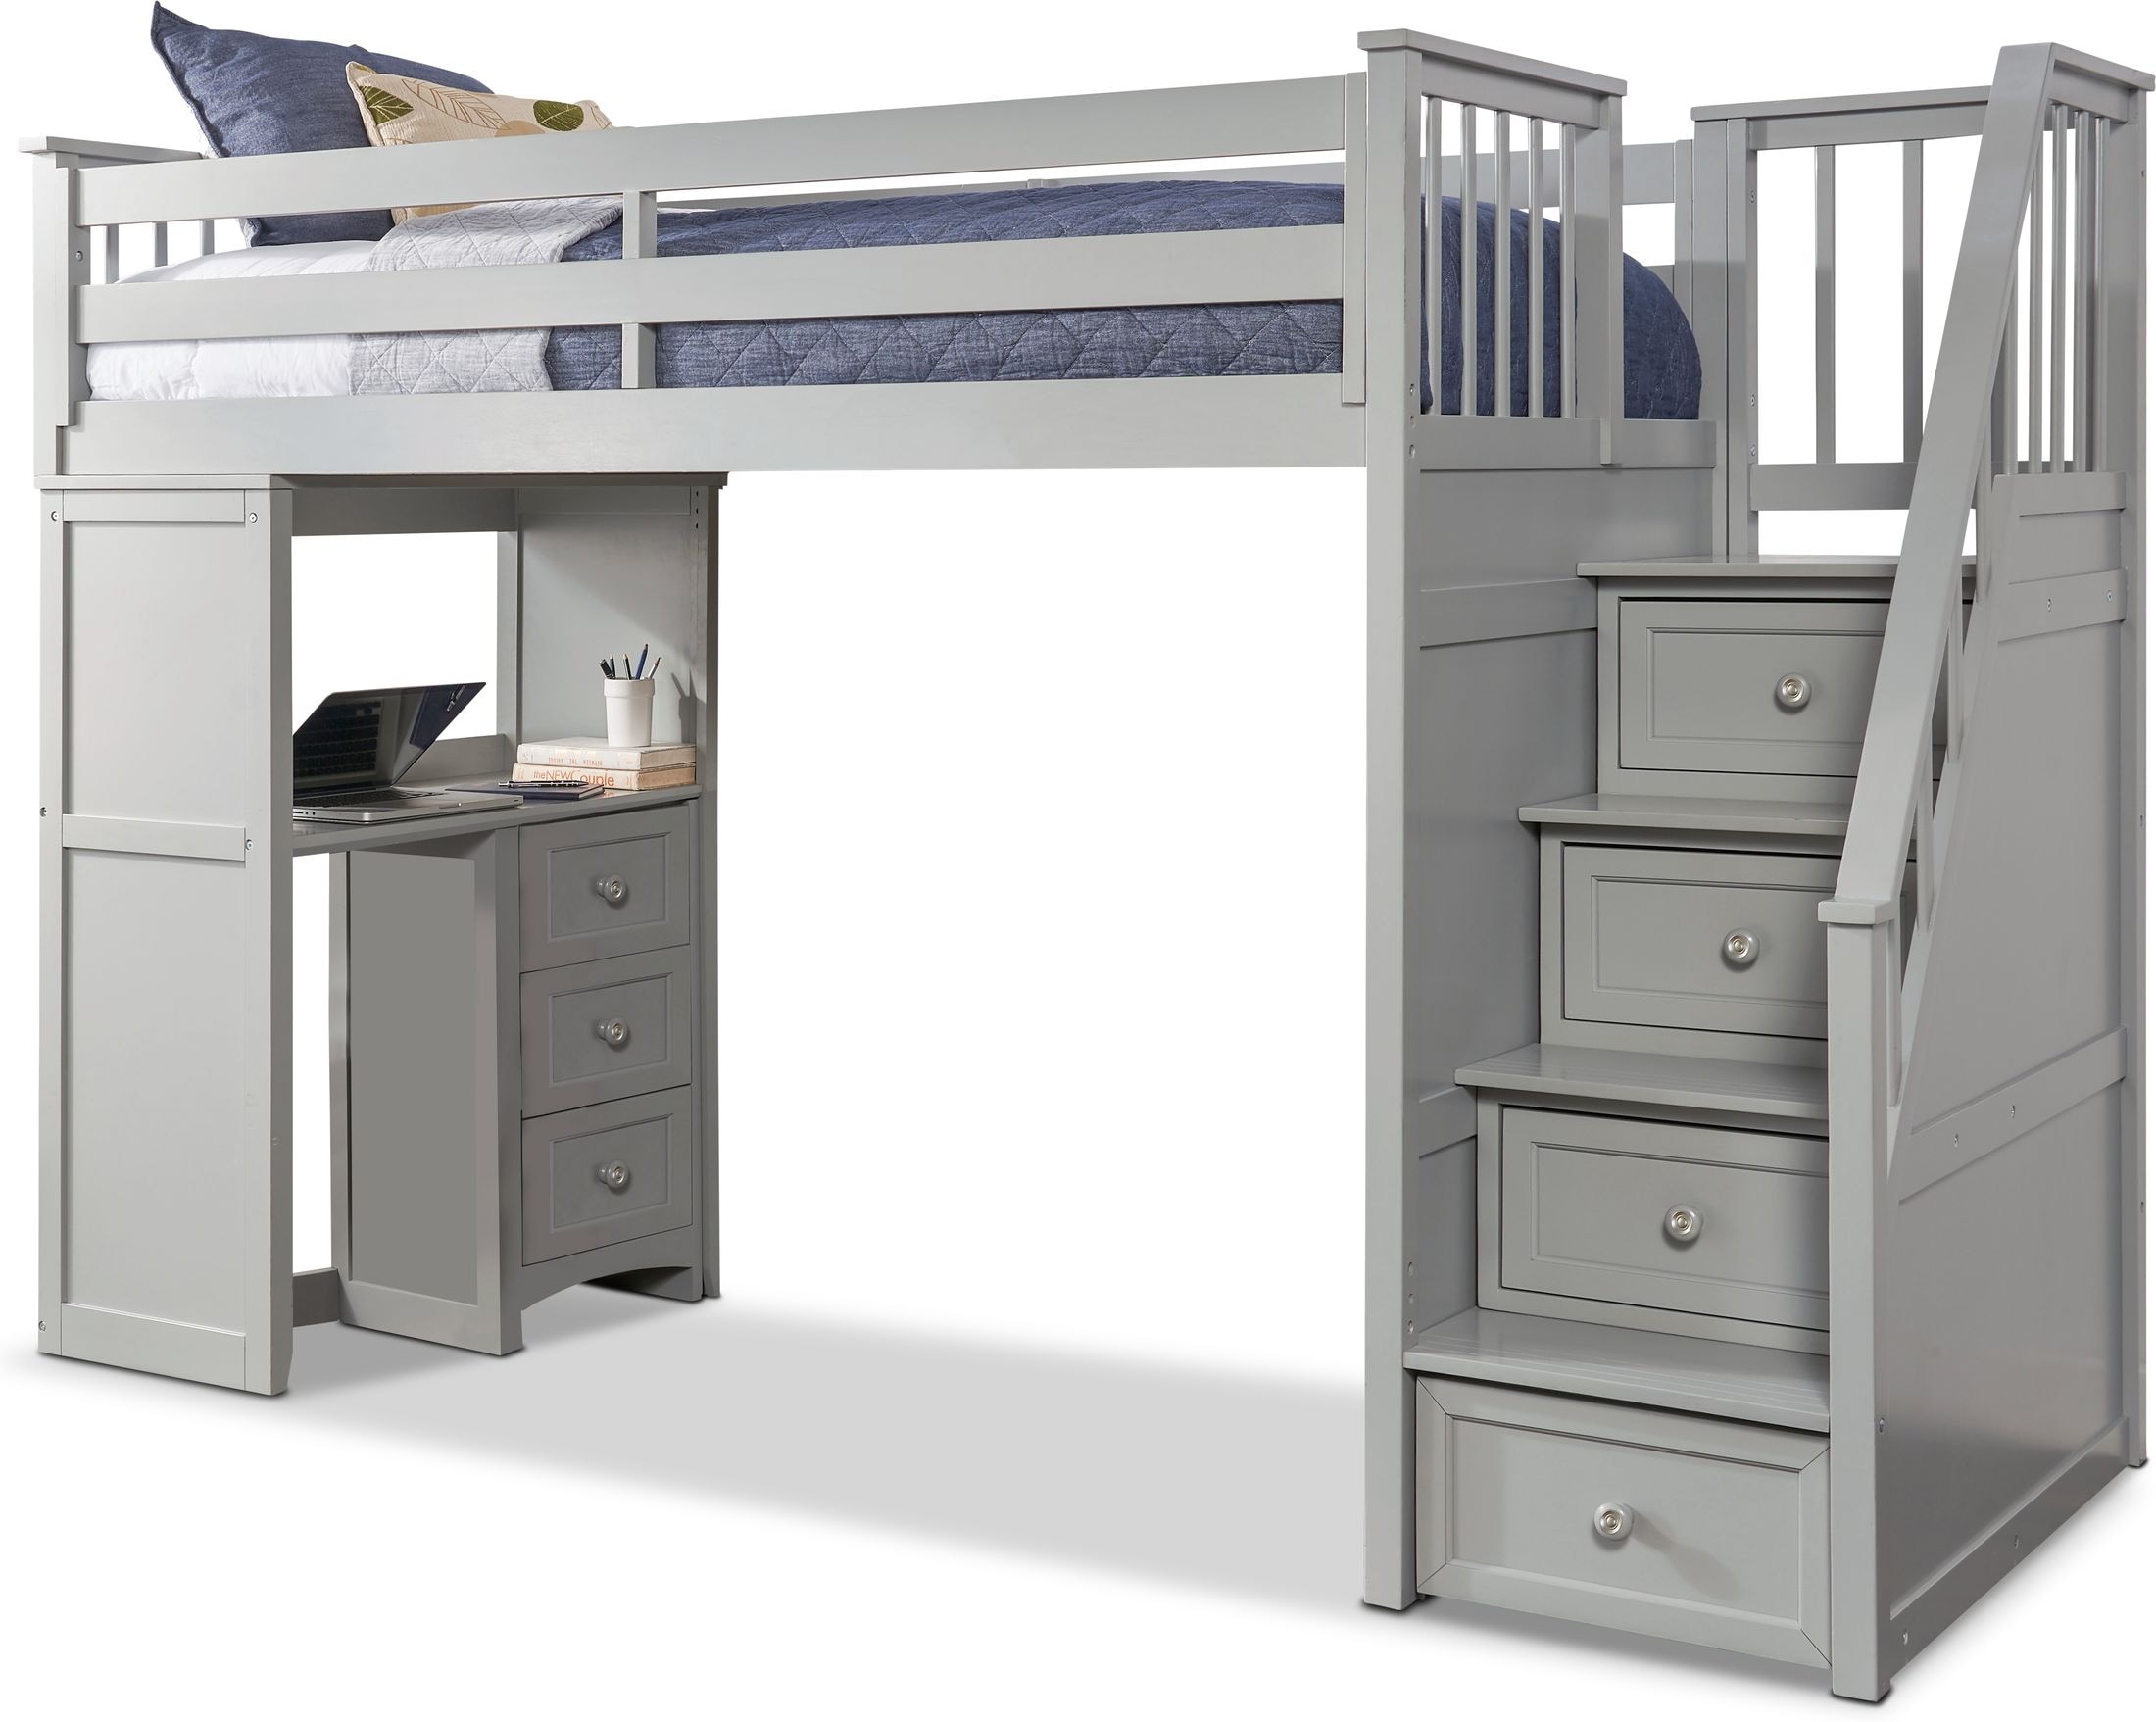 Undefined Value City Furniture, Twin Loft Bed With Storage Underneath